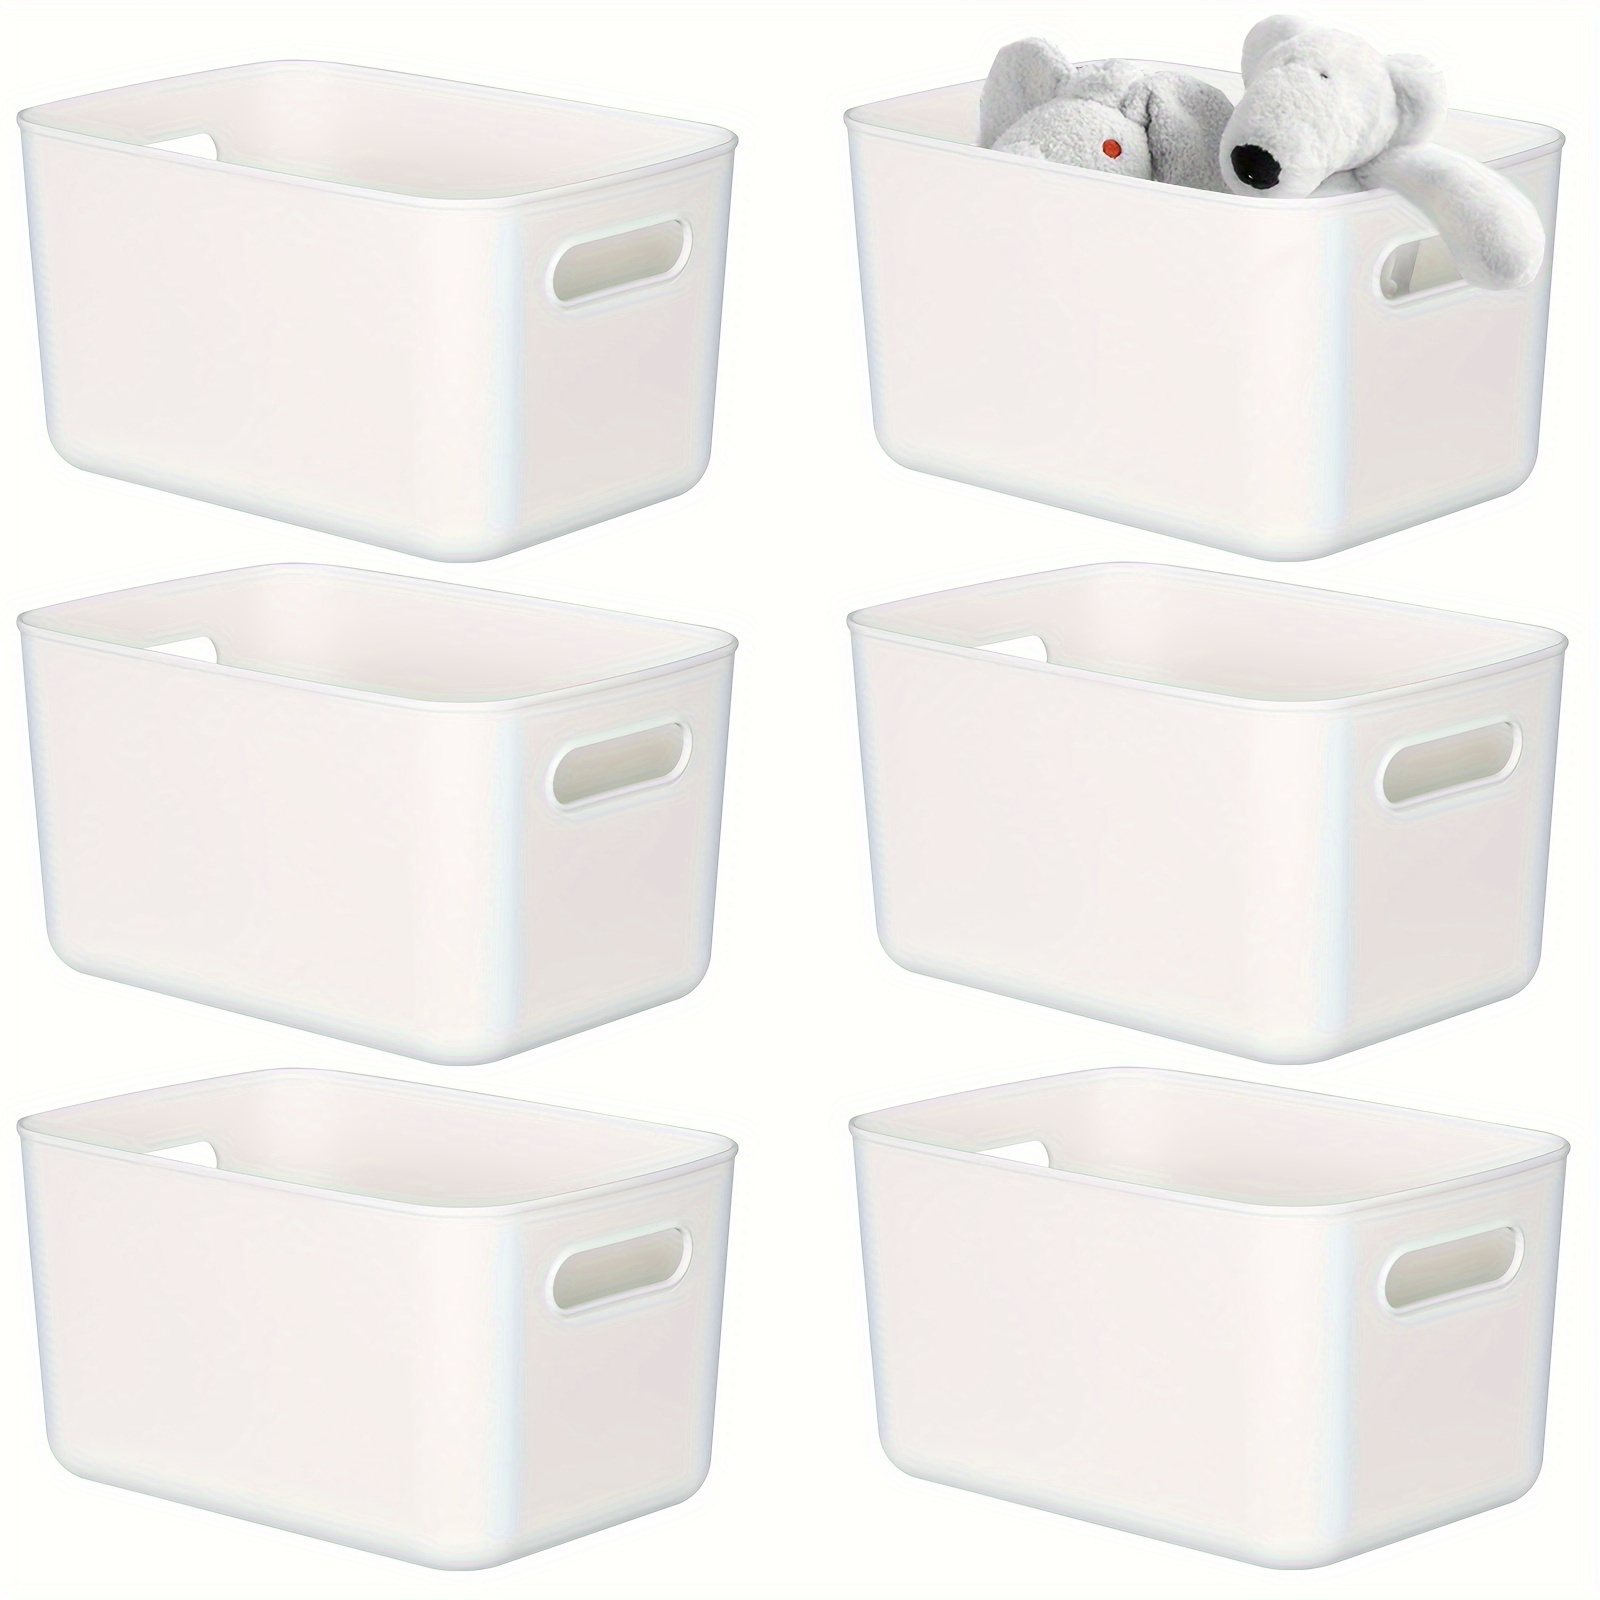 6pcs clear storage bins stackable household storage containers